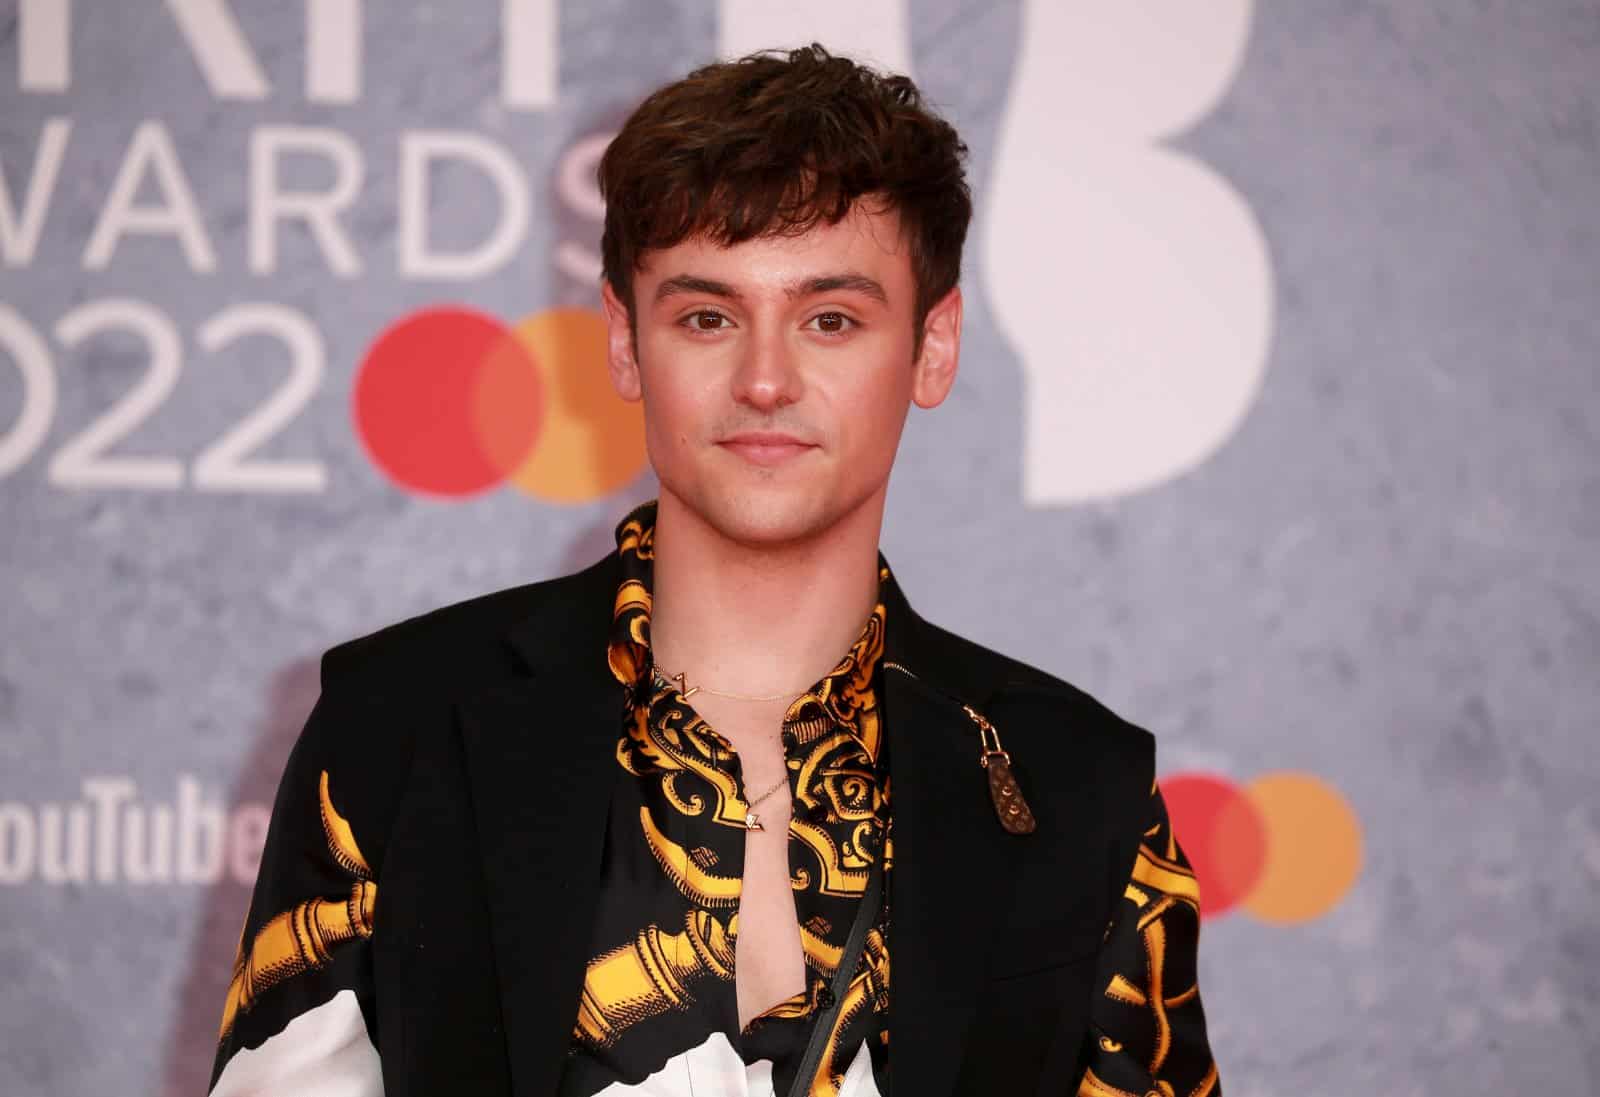 Image Credit: Shutterstock / Fred Duval <p><span>At The Virgin Atlantic Attitude Awards in 2018, British diver Tom Daley spoke about the hurdles he faced coming out in the sports world and his subsequent advocacy for LGBTQ+ rights within sports and beyond.</span></p>